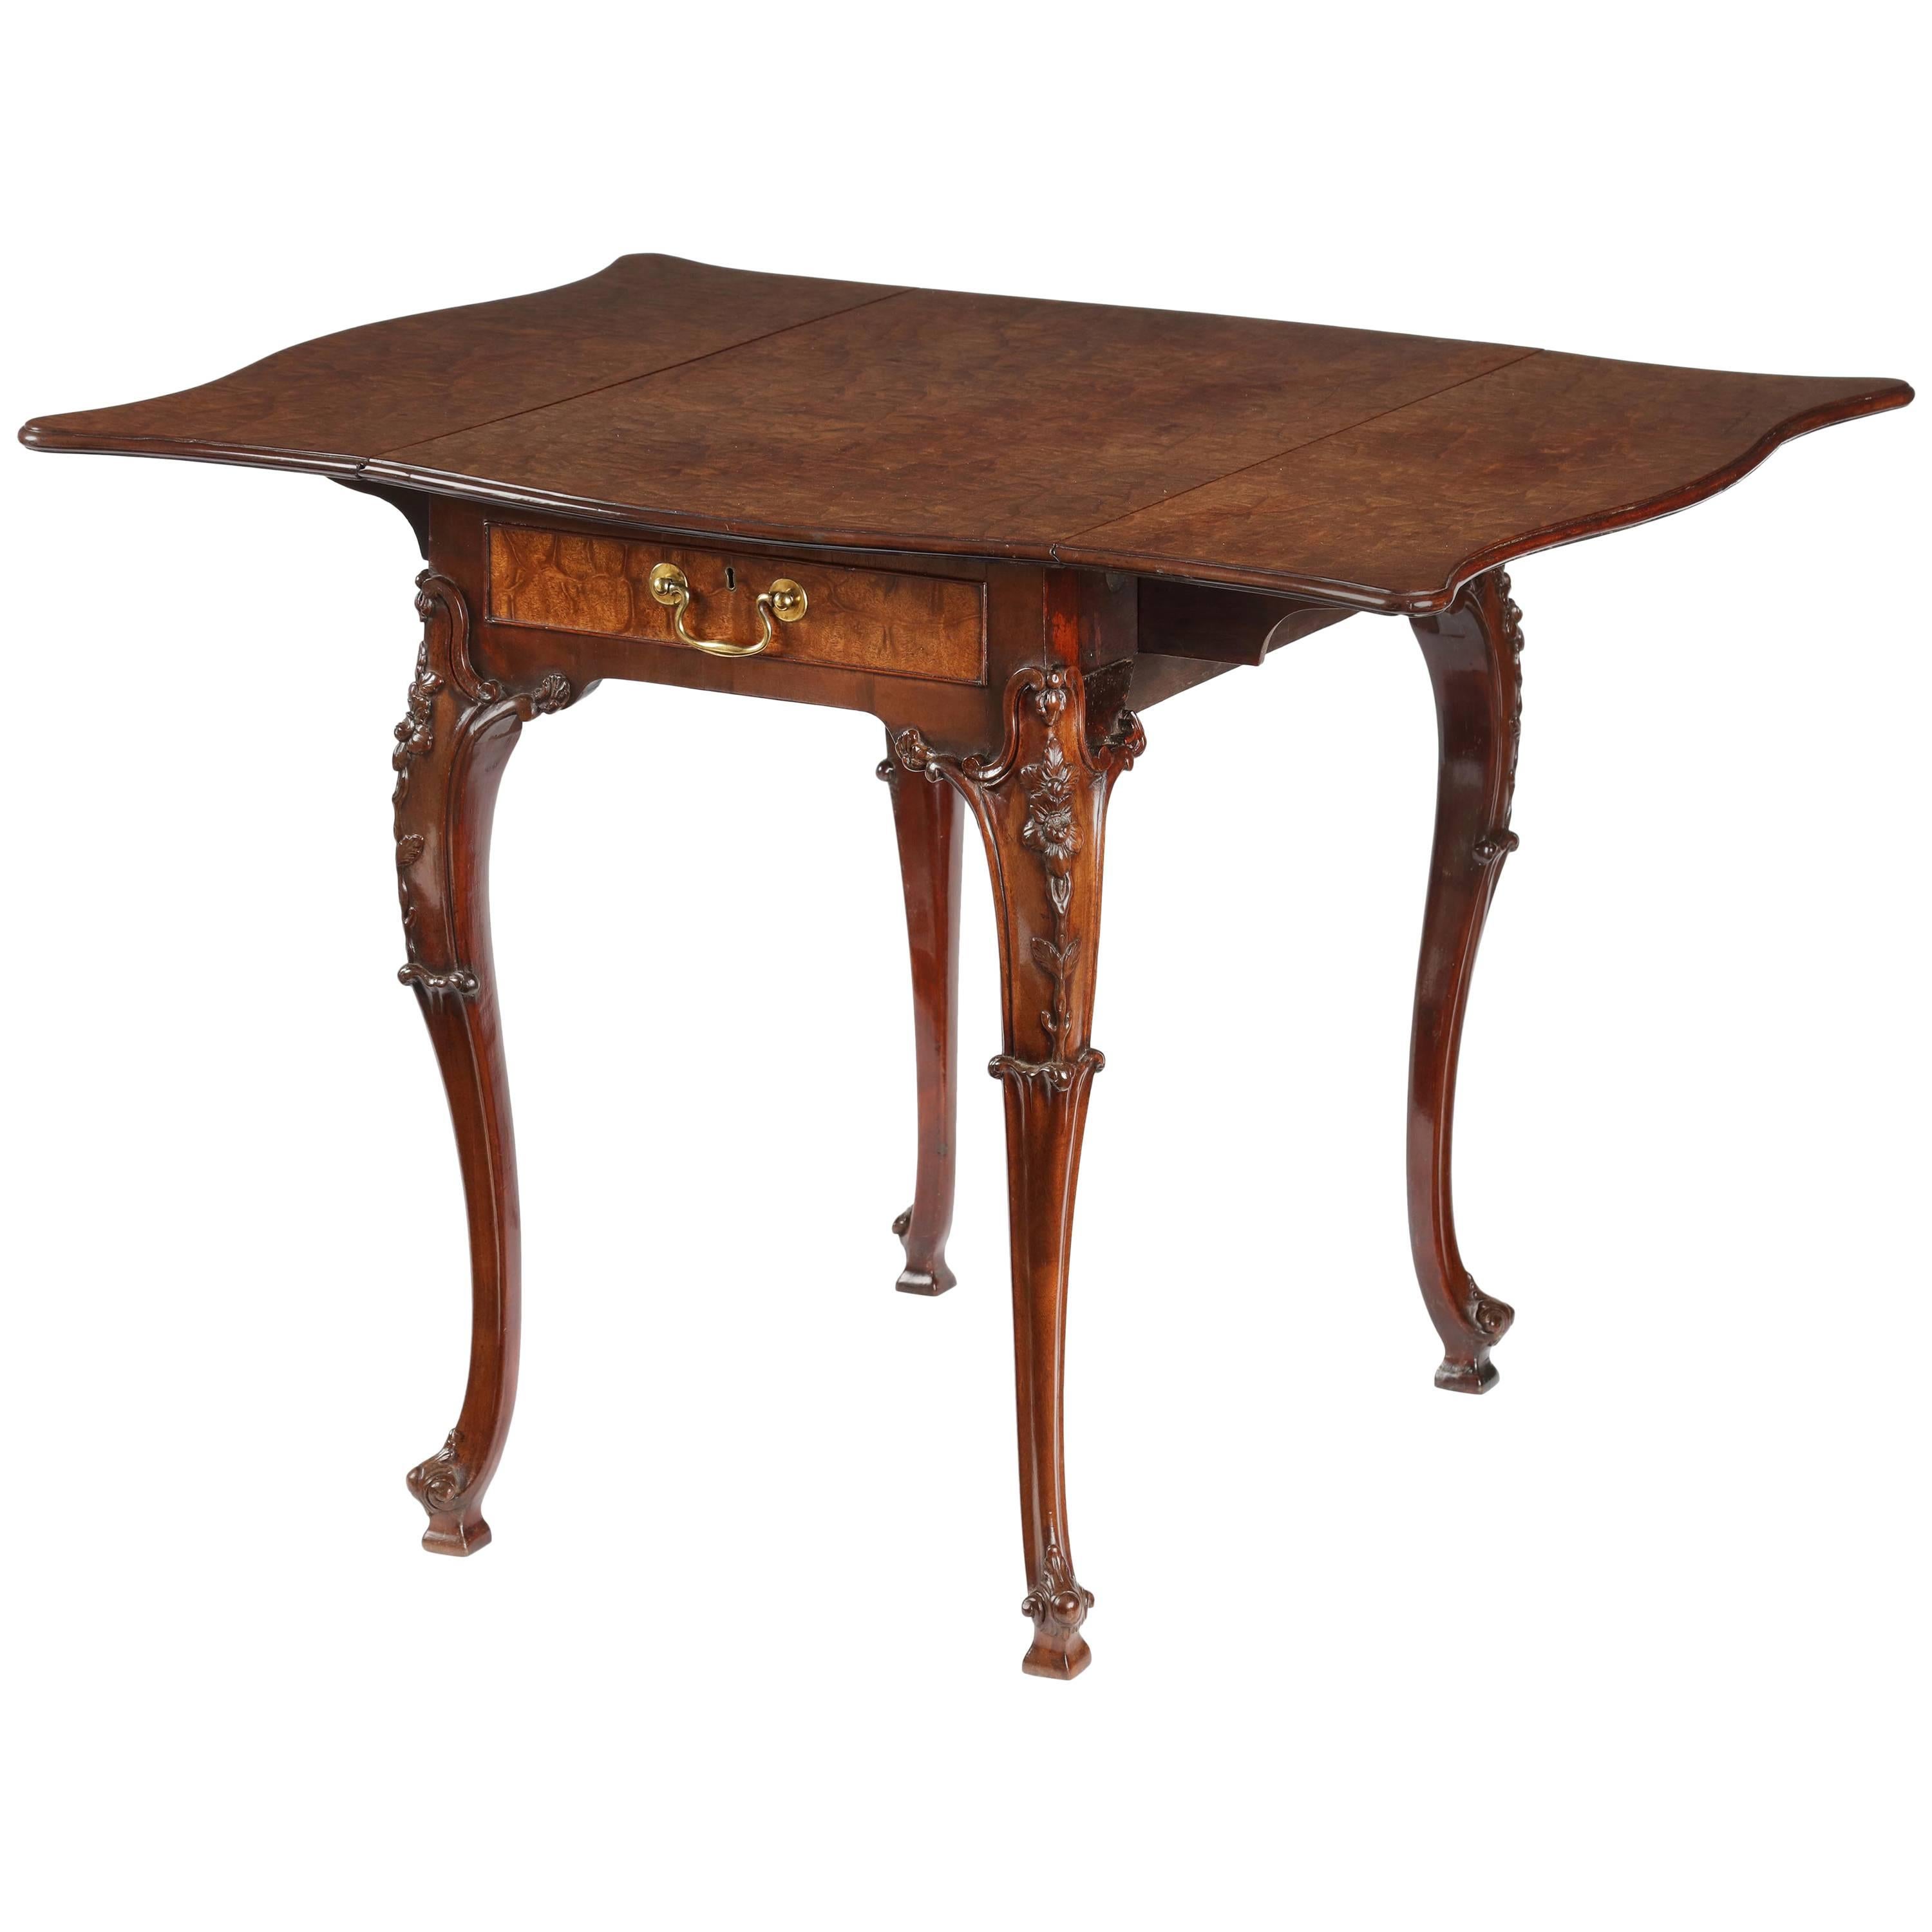 George III Carved Mahogany Pembroke Table Attributed to Thomas Chippendale